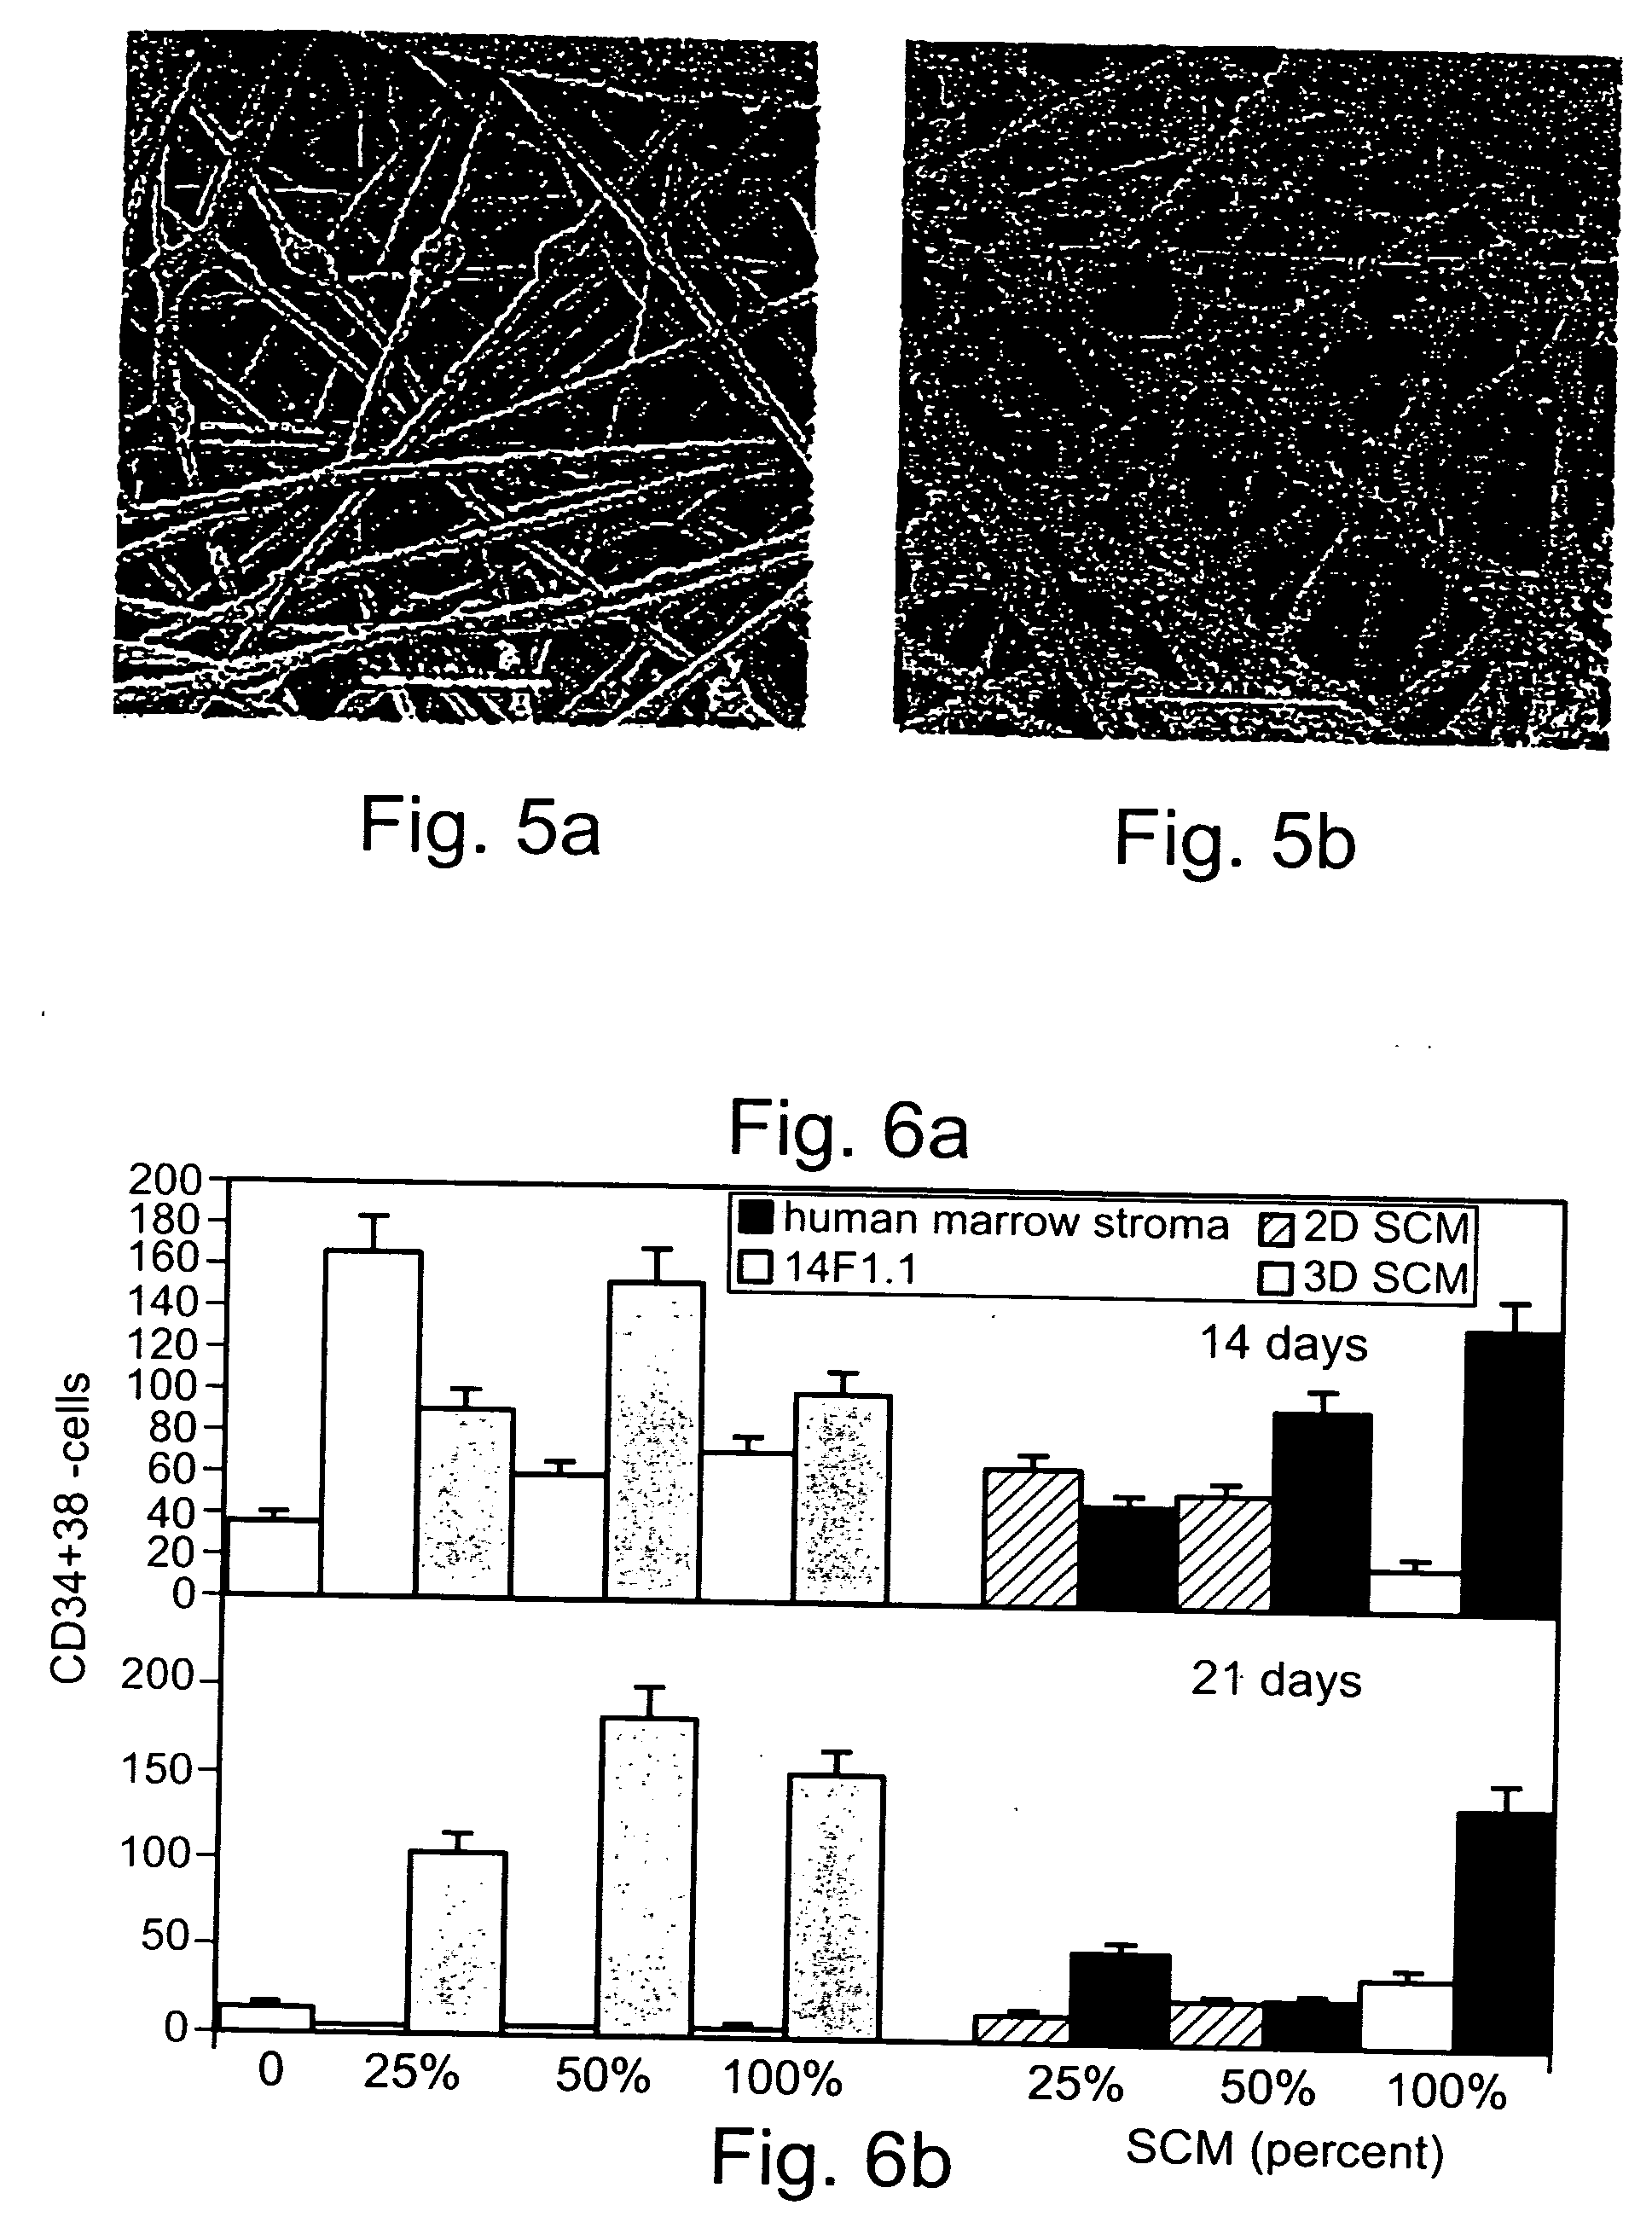 Method and apparatus for maintenance and expansion of hemopoietic stem cells and/or progenitor cells